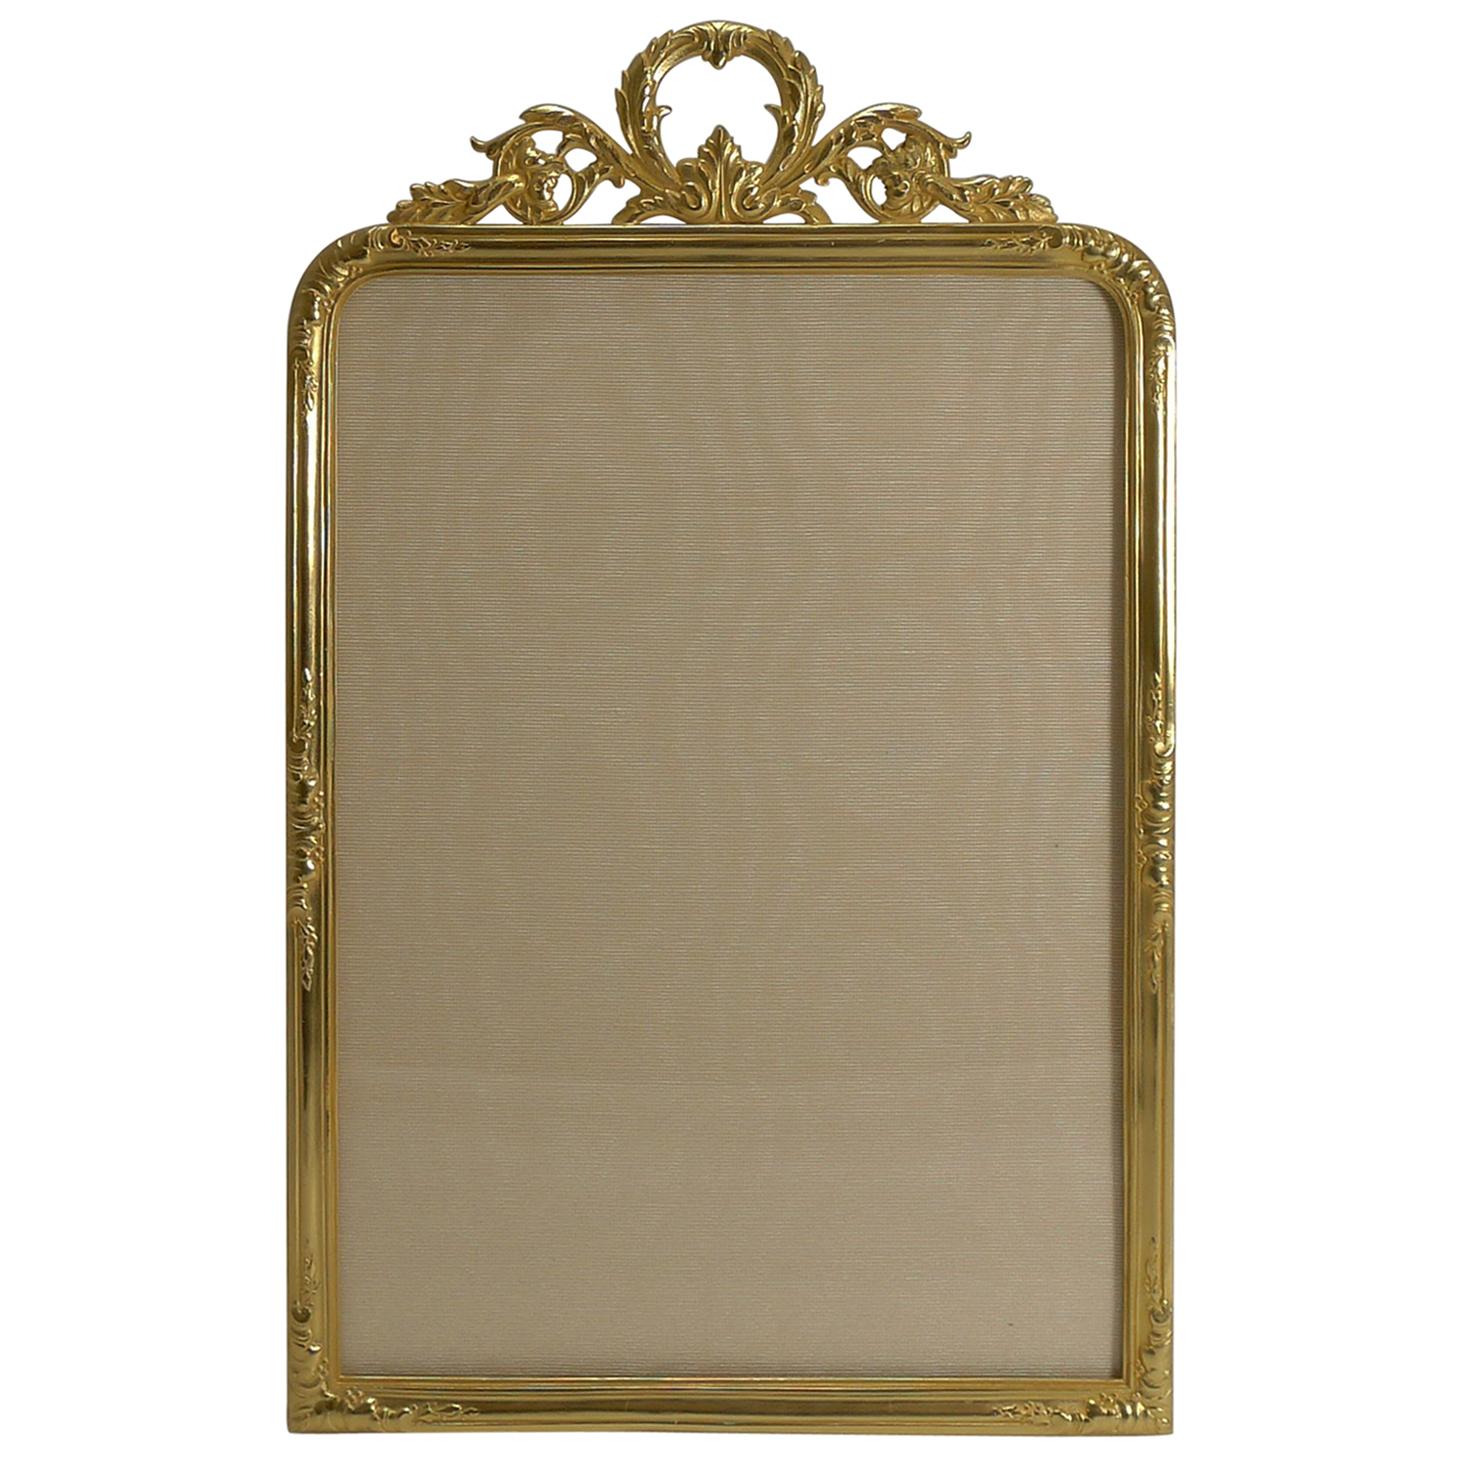 Large Antique French Gilded Bronze Photograph Frame, circa 1900